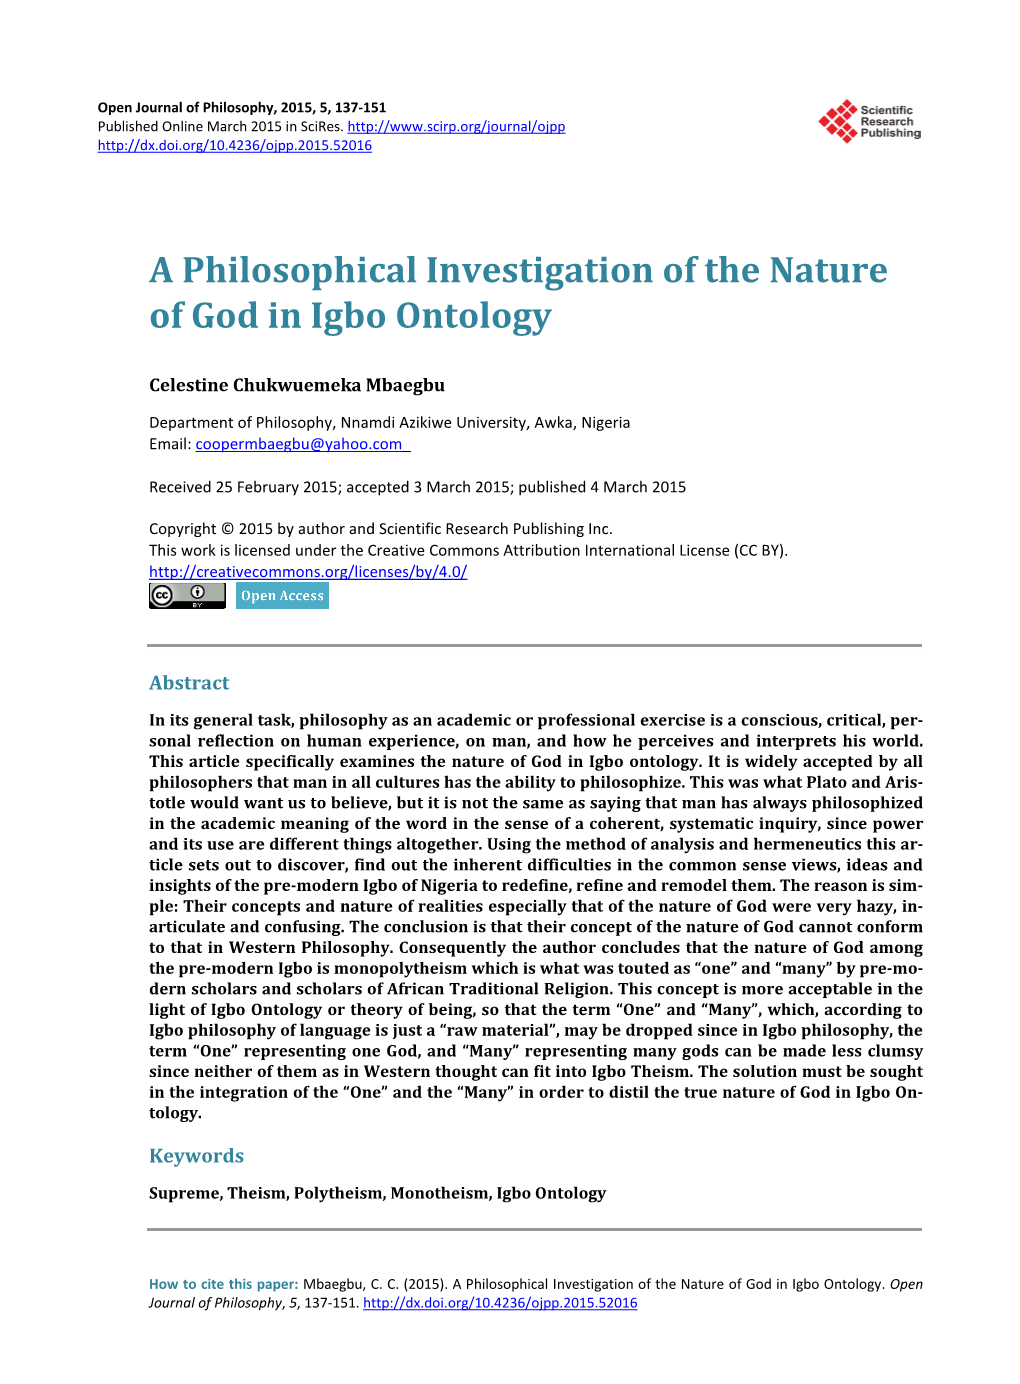 A Philosophical Investigation of the Nature of God in Igbo Ontology